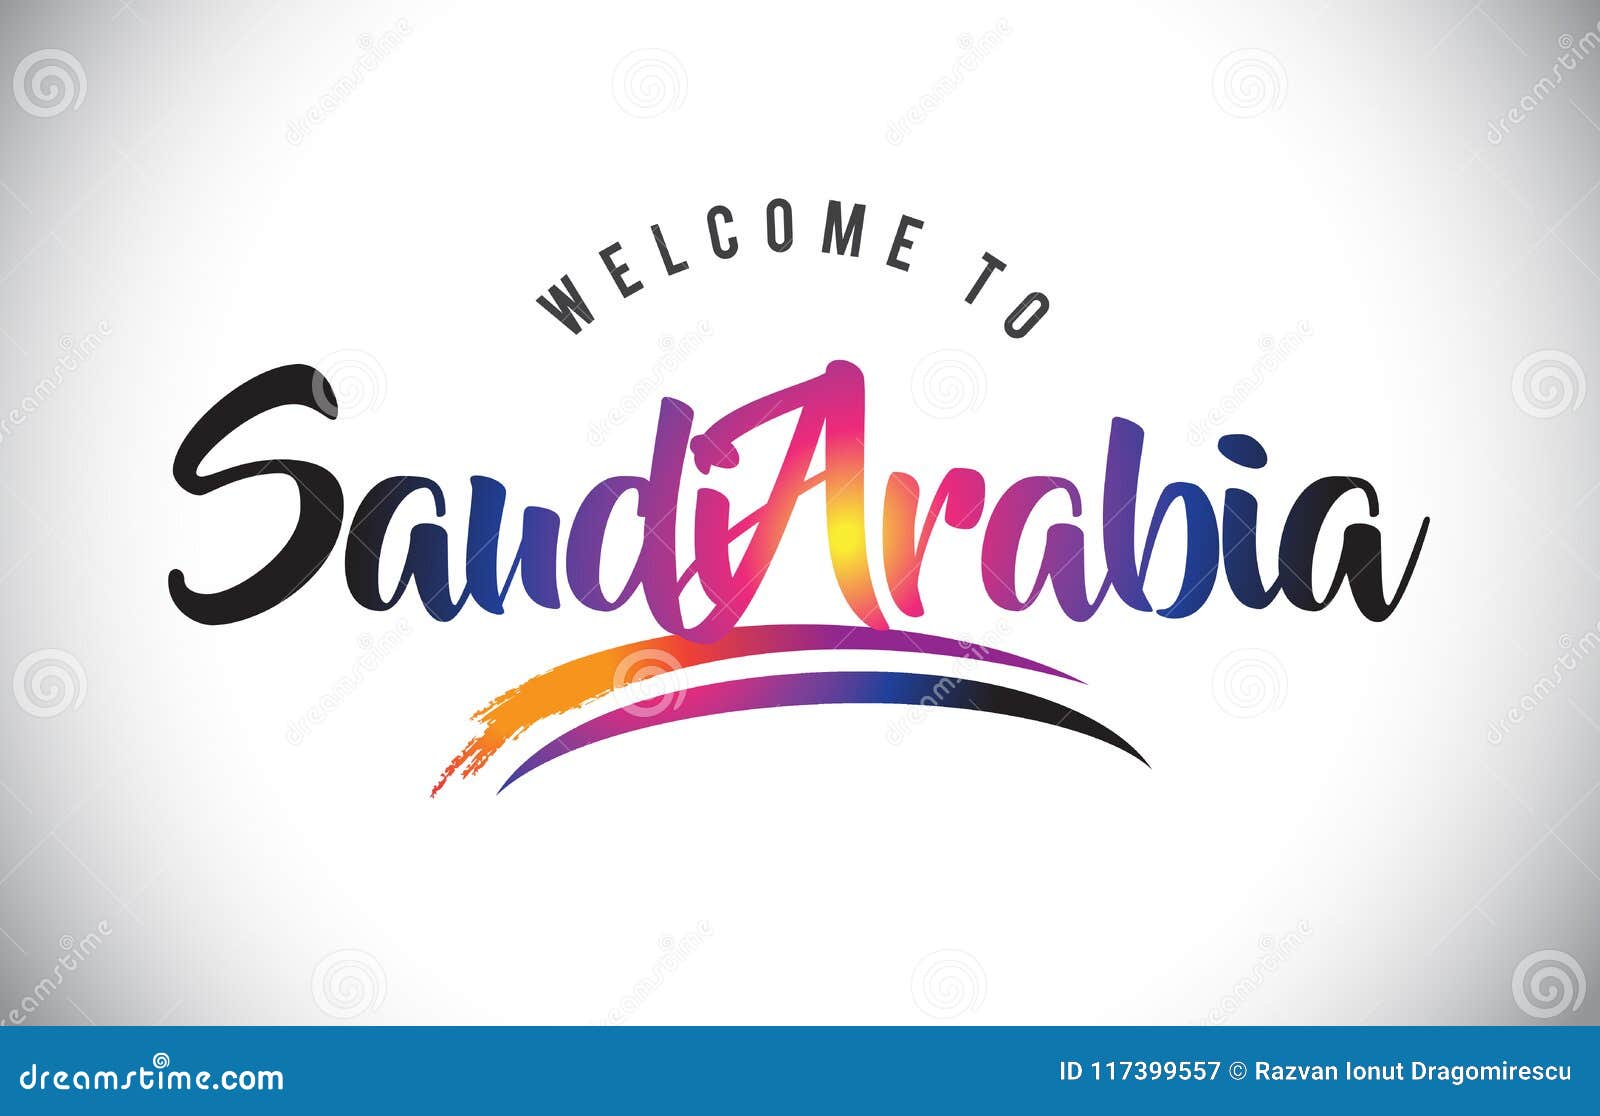 saudiarabia welcome to message in purple vibrant modern colors.